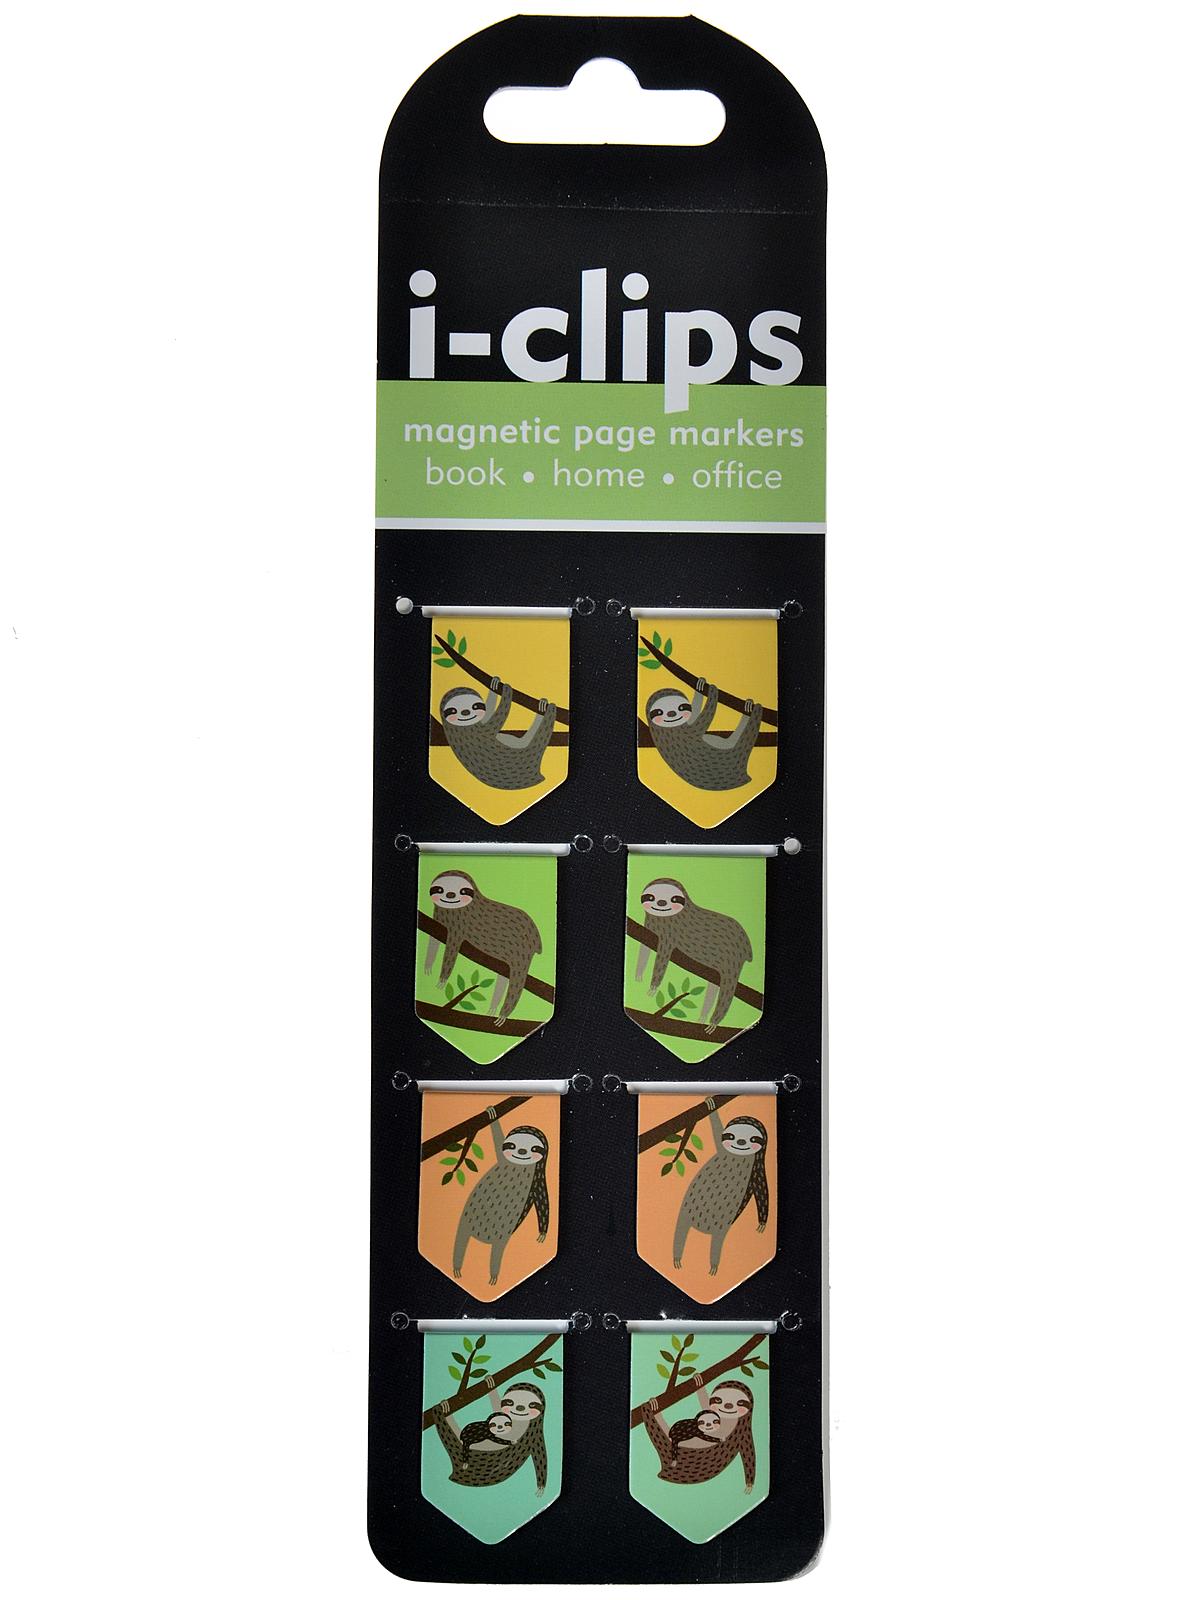 I-clips Magnetic Page Markers Sloths 8 Pcs.